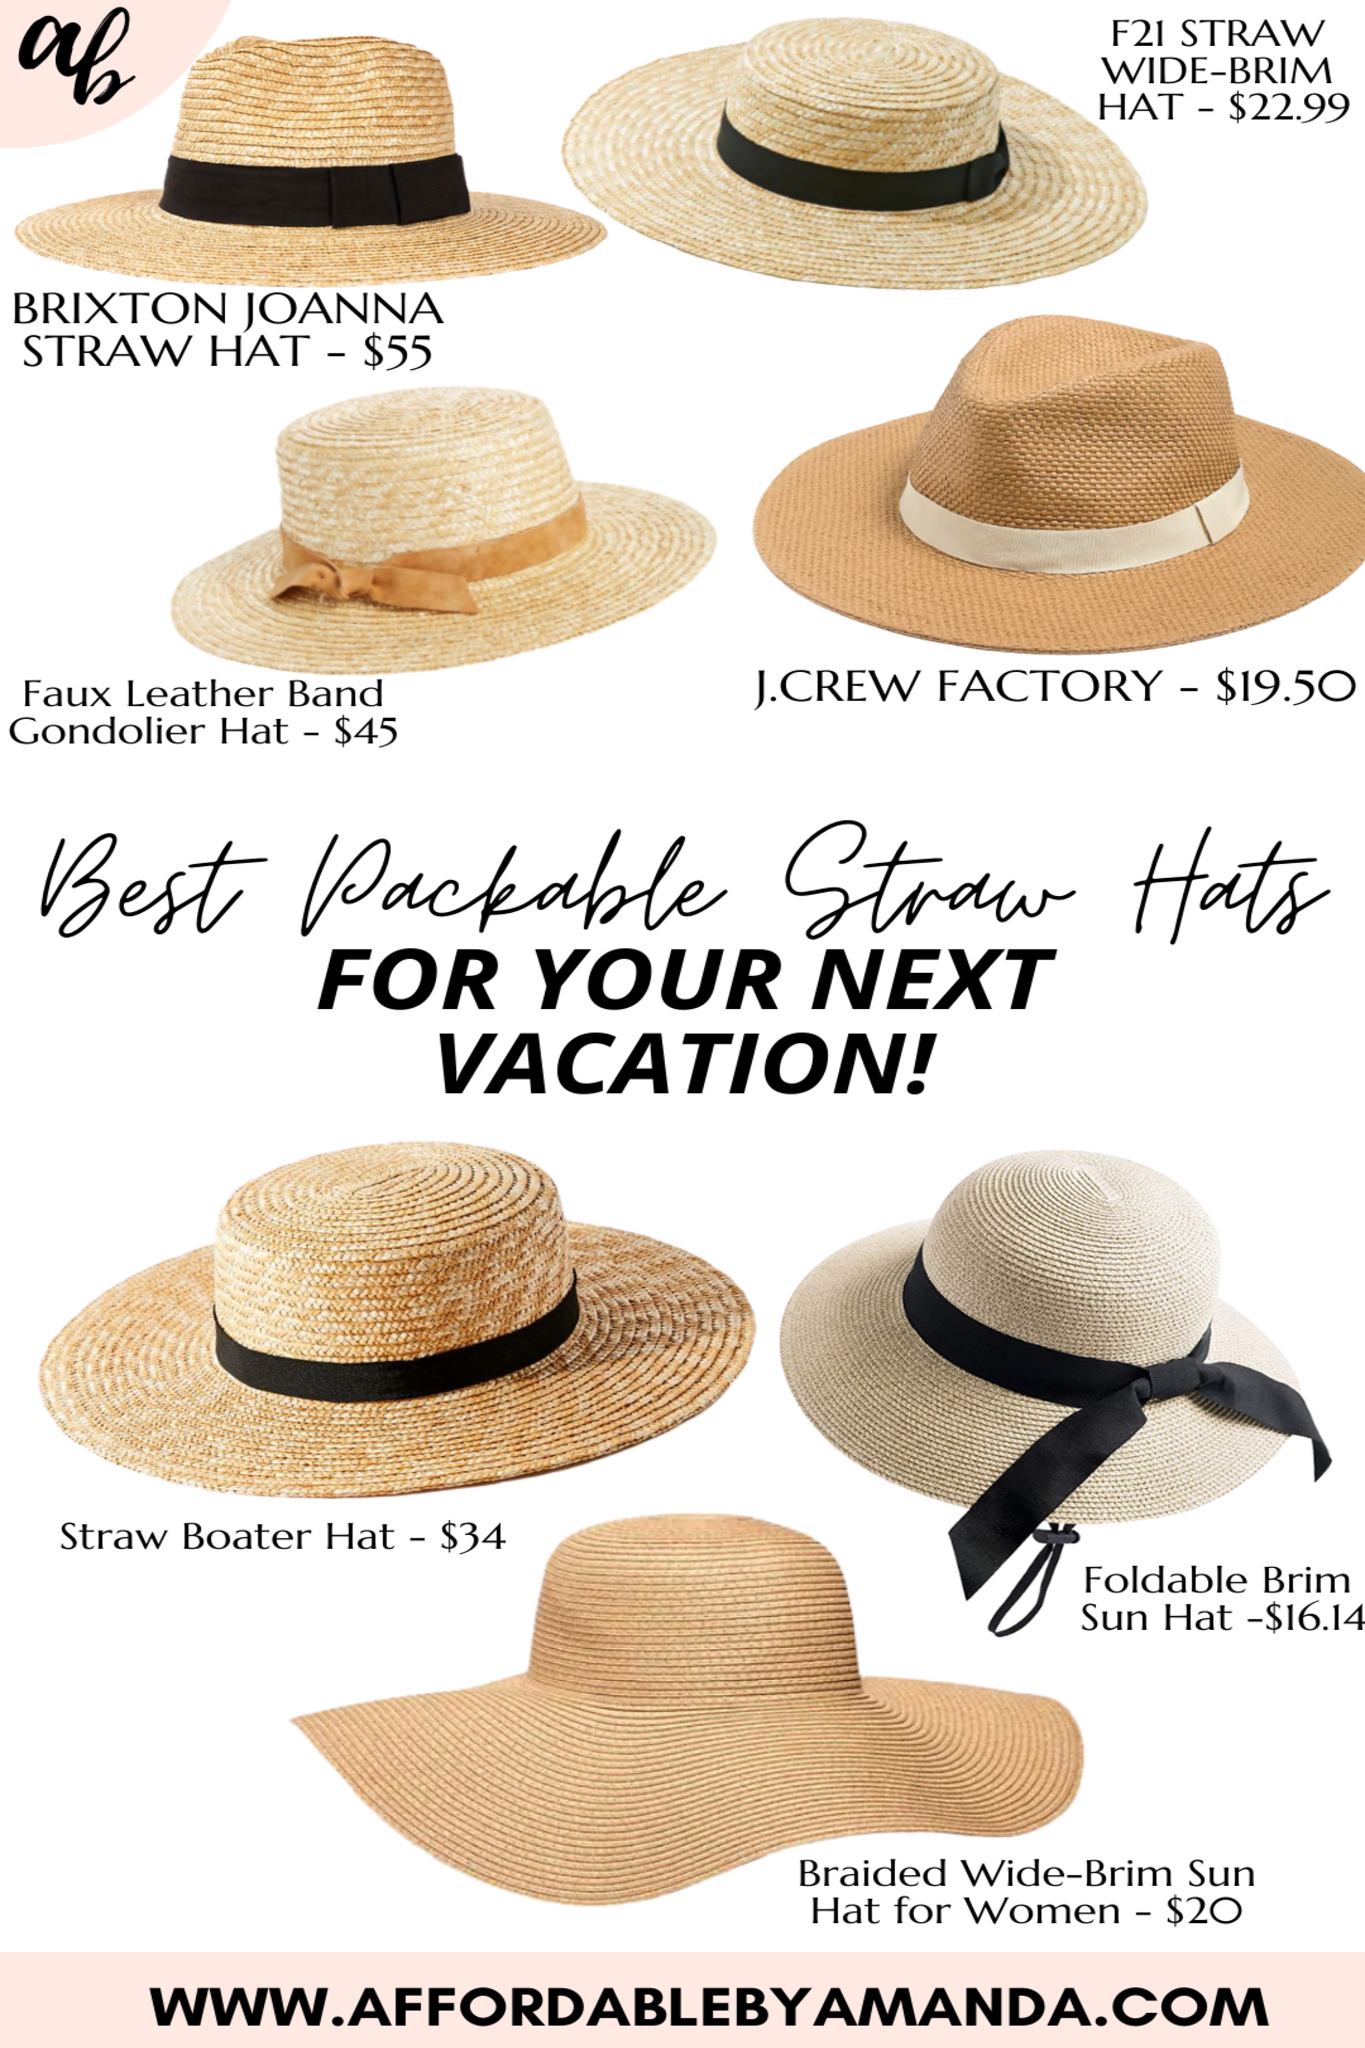 Best Straw Hats | Straw Hats for the Beach | What To Pack for the Beach 2020 | Packing List for the Beach in 2020